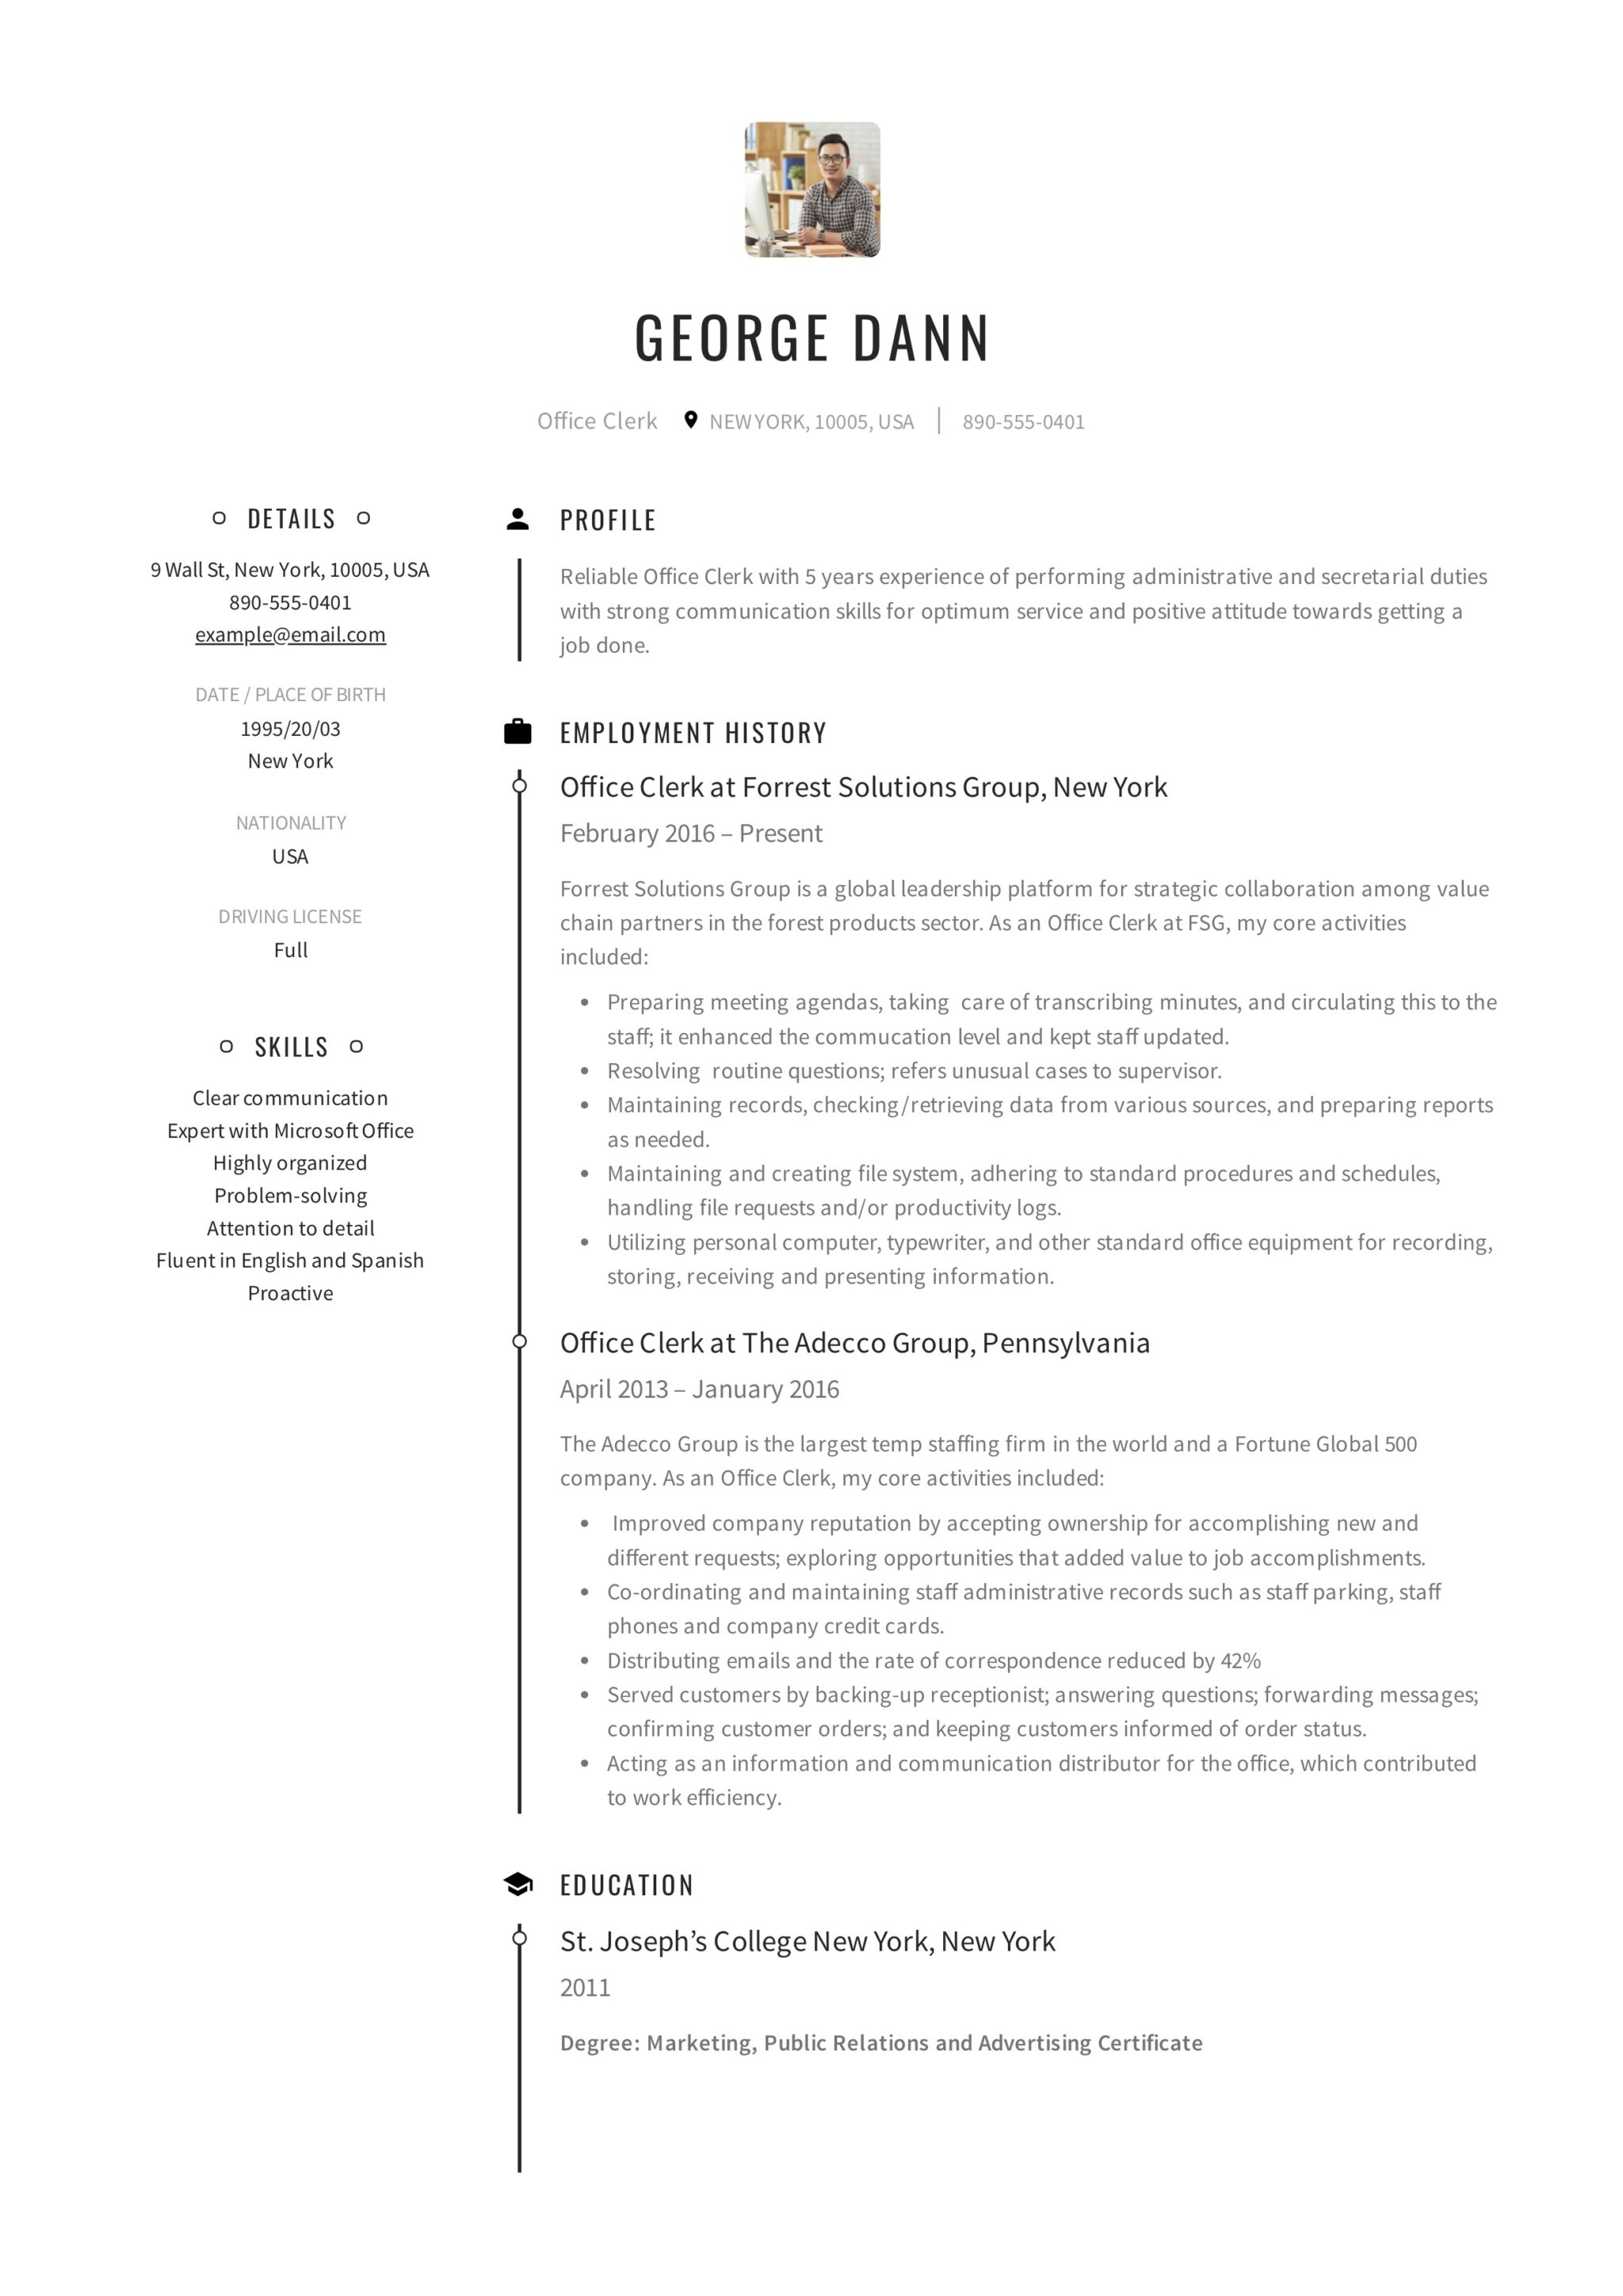 resume objective examples for office clerk